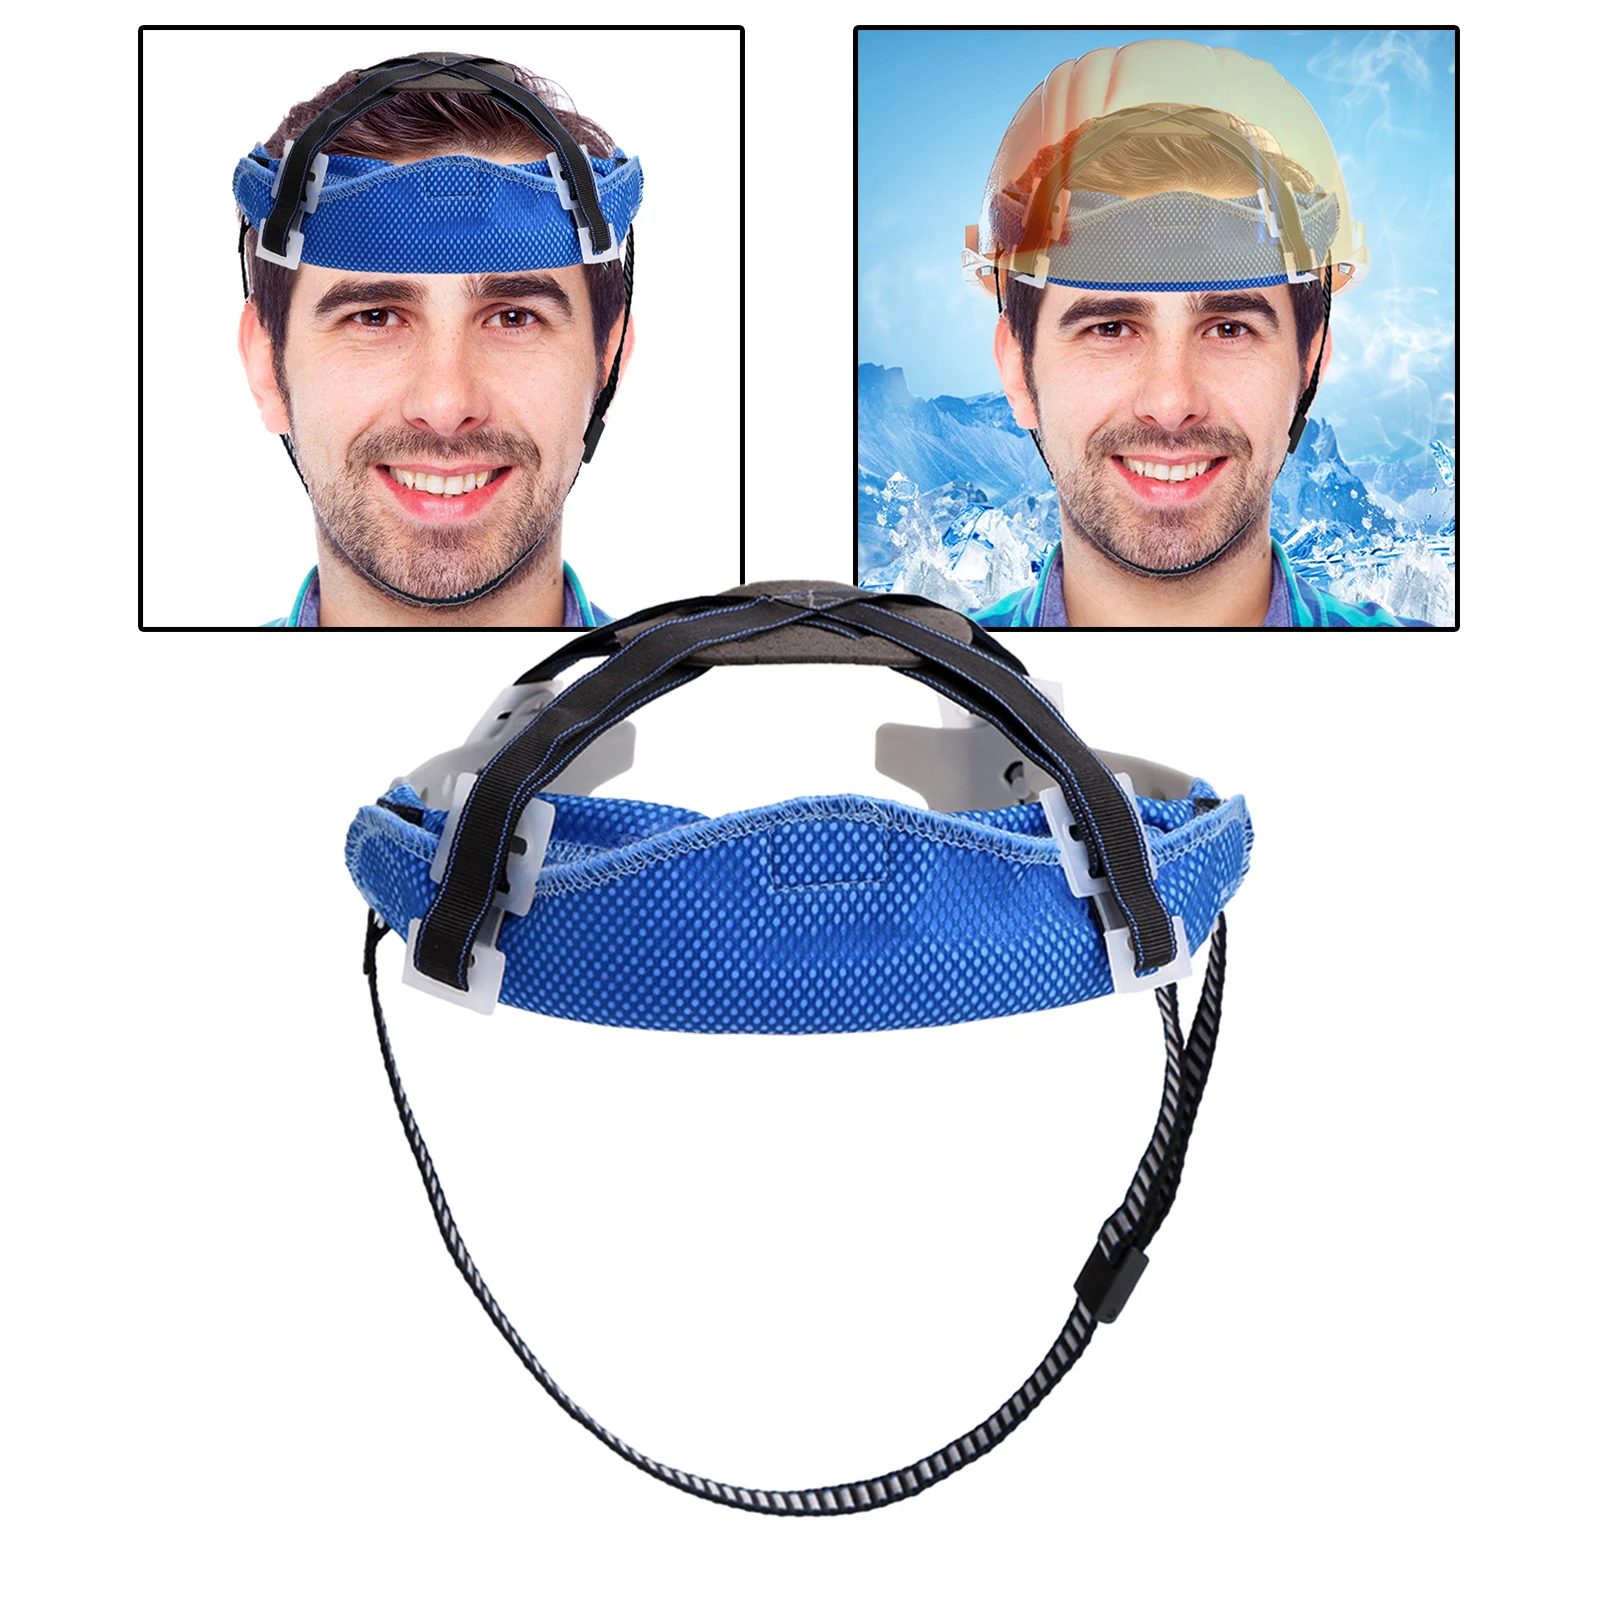 Hard Hat Sweatband Safety Helmet Liner Strip Cold Feeling Outdoor Operations